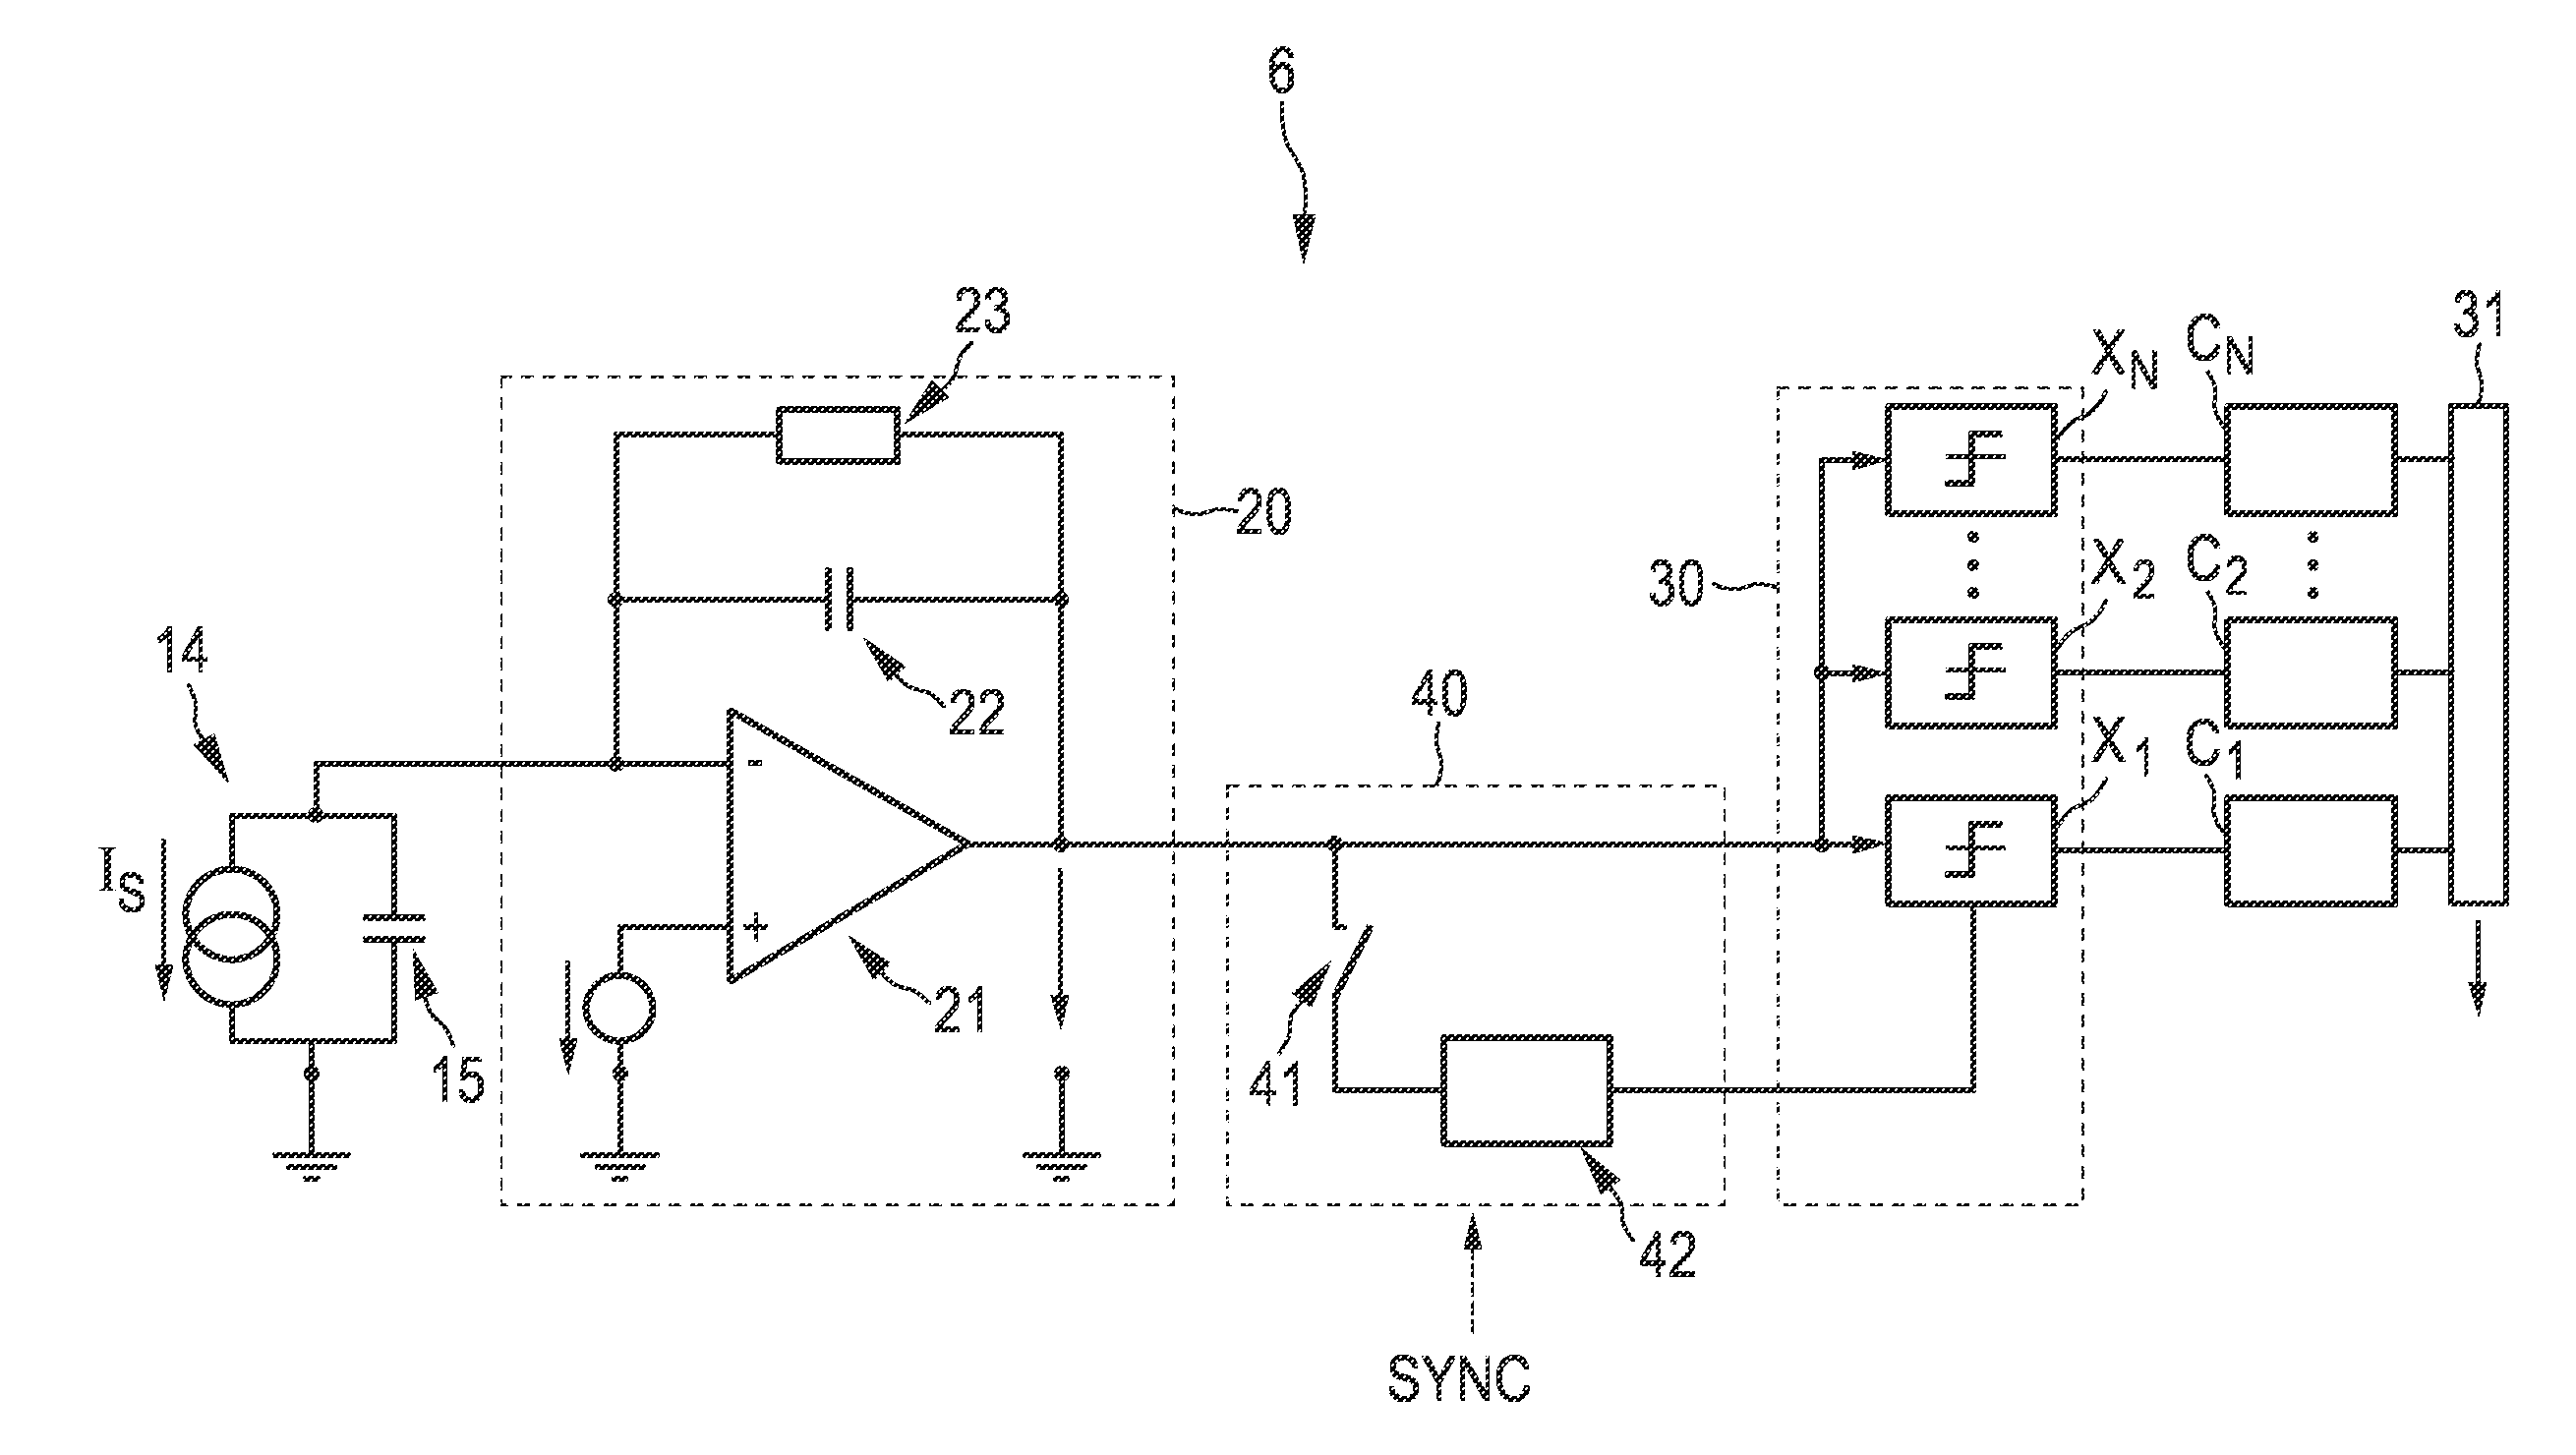 Detection device for detecting photons emitted by a radiation source